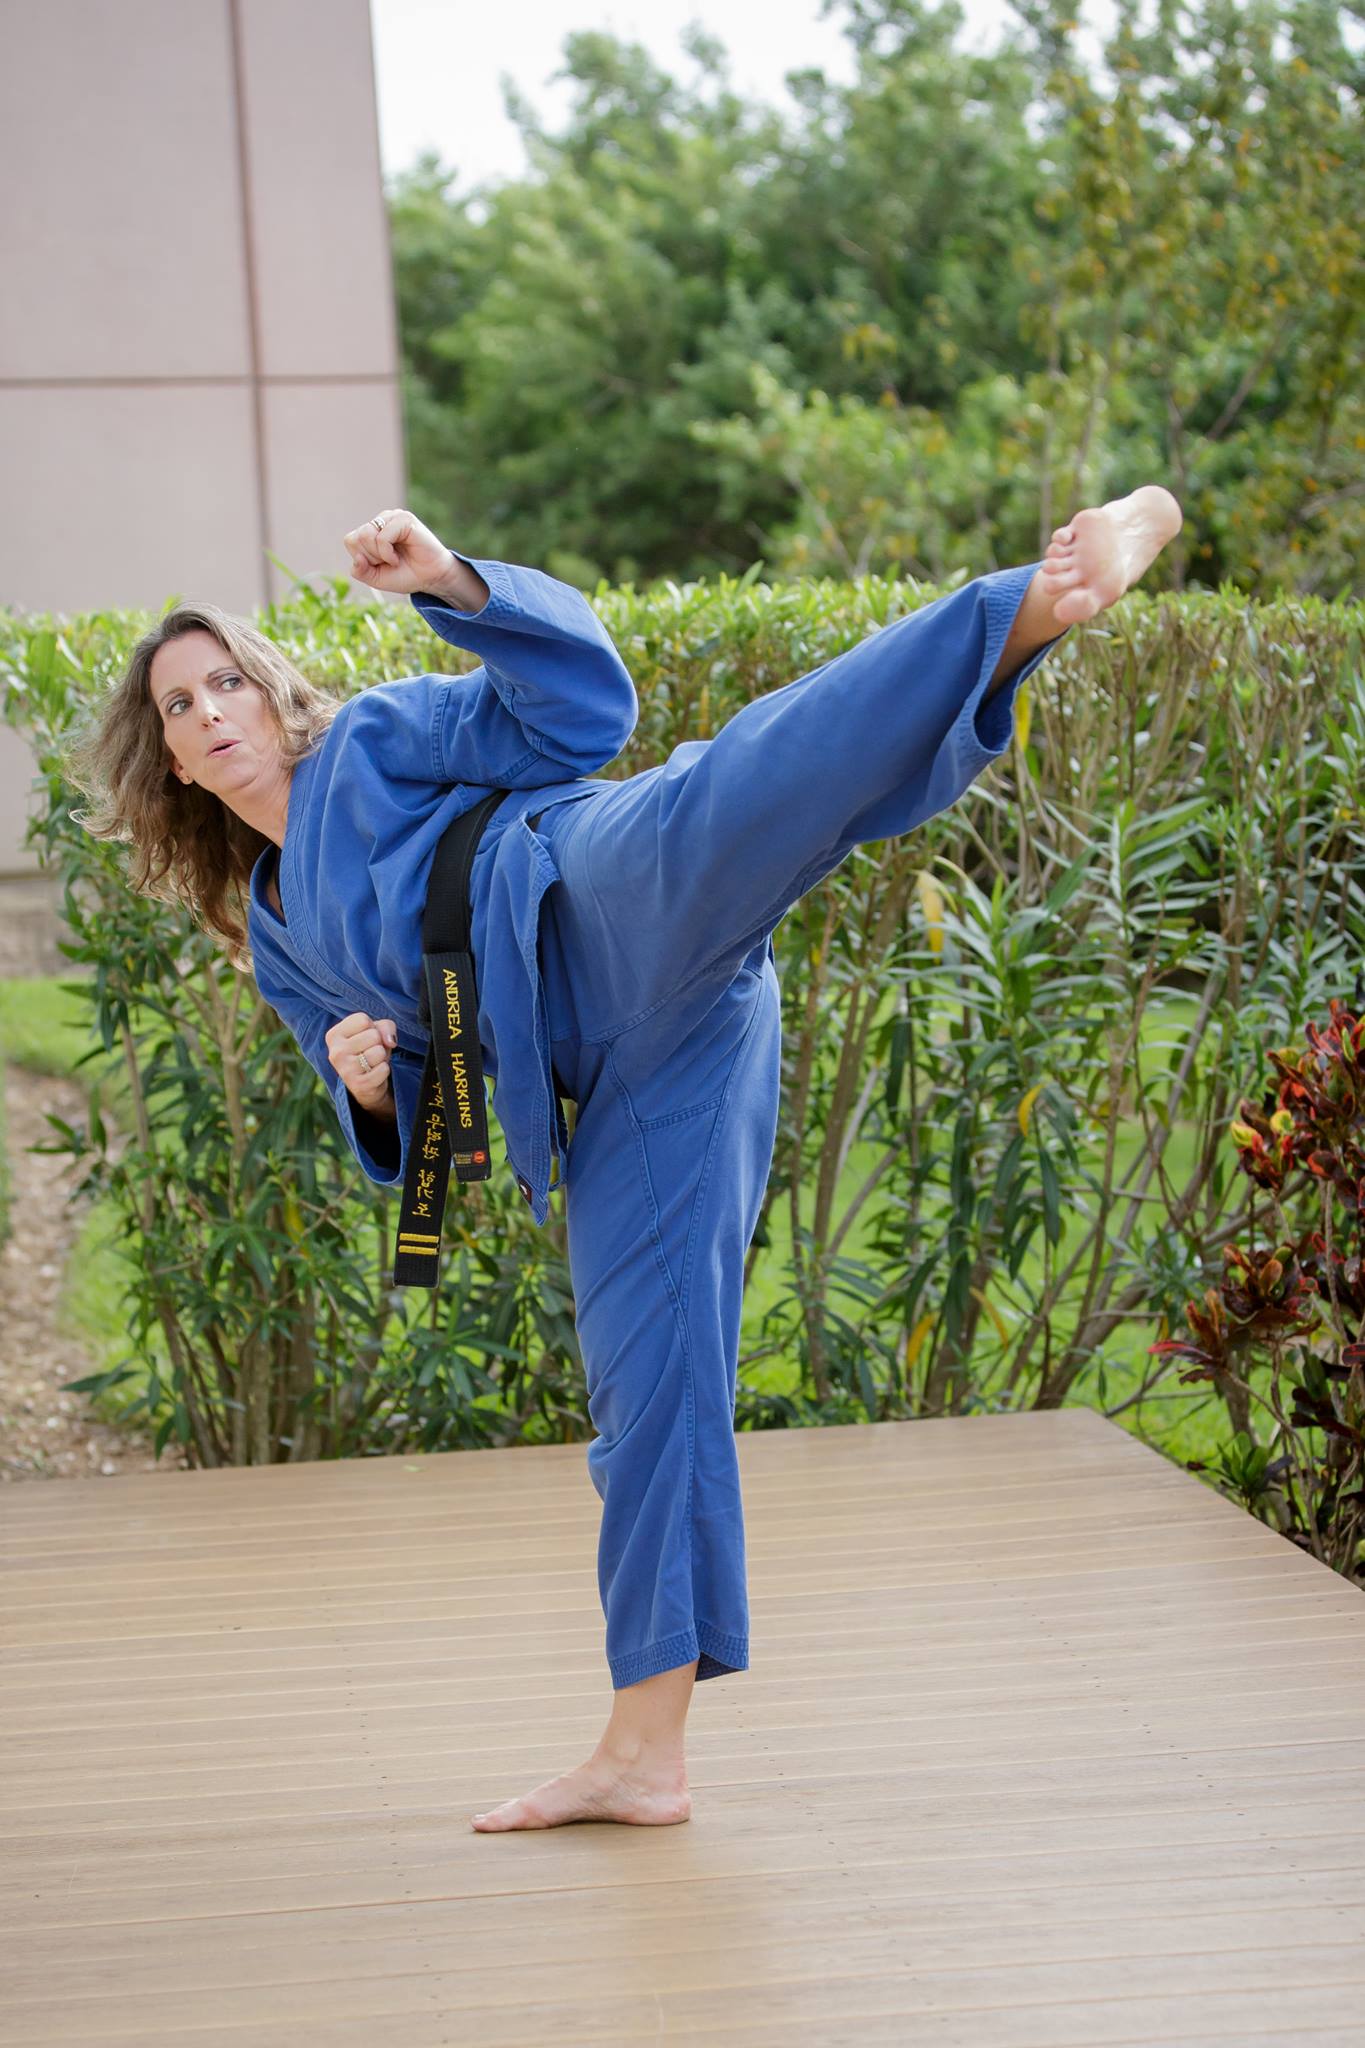 3 Reasons Female Martial Artists Rule The Martial Arts Woman 